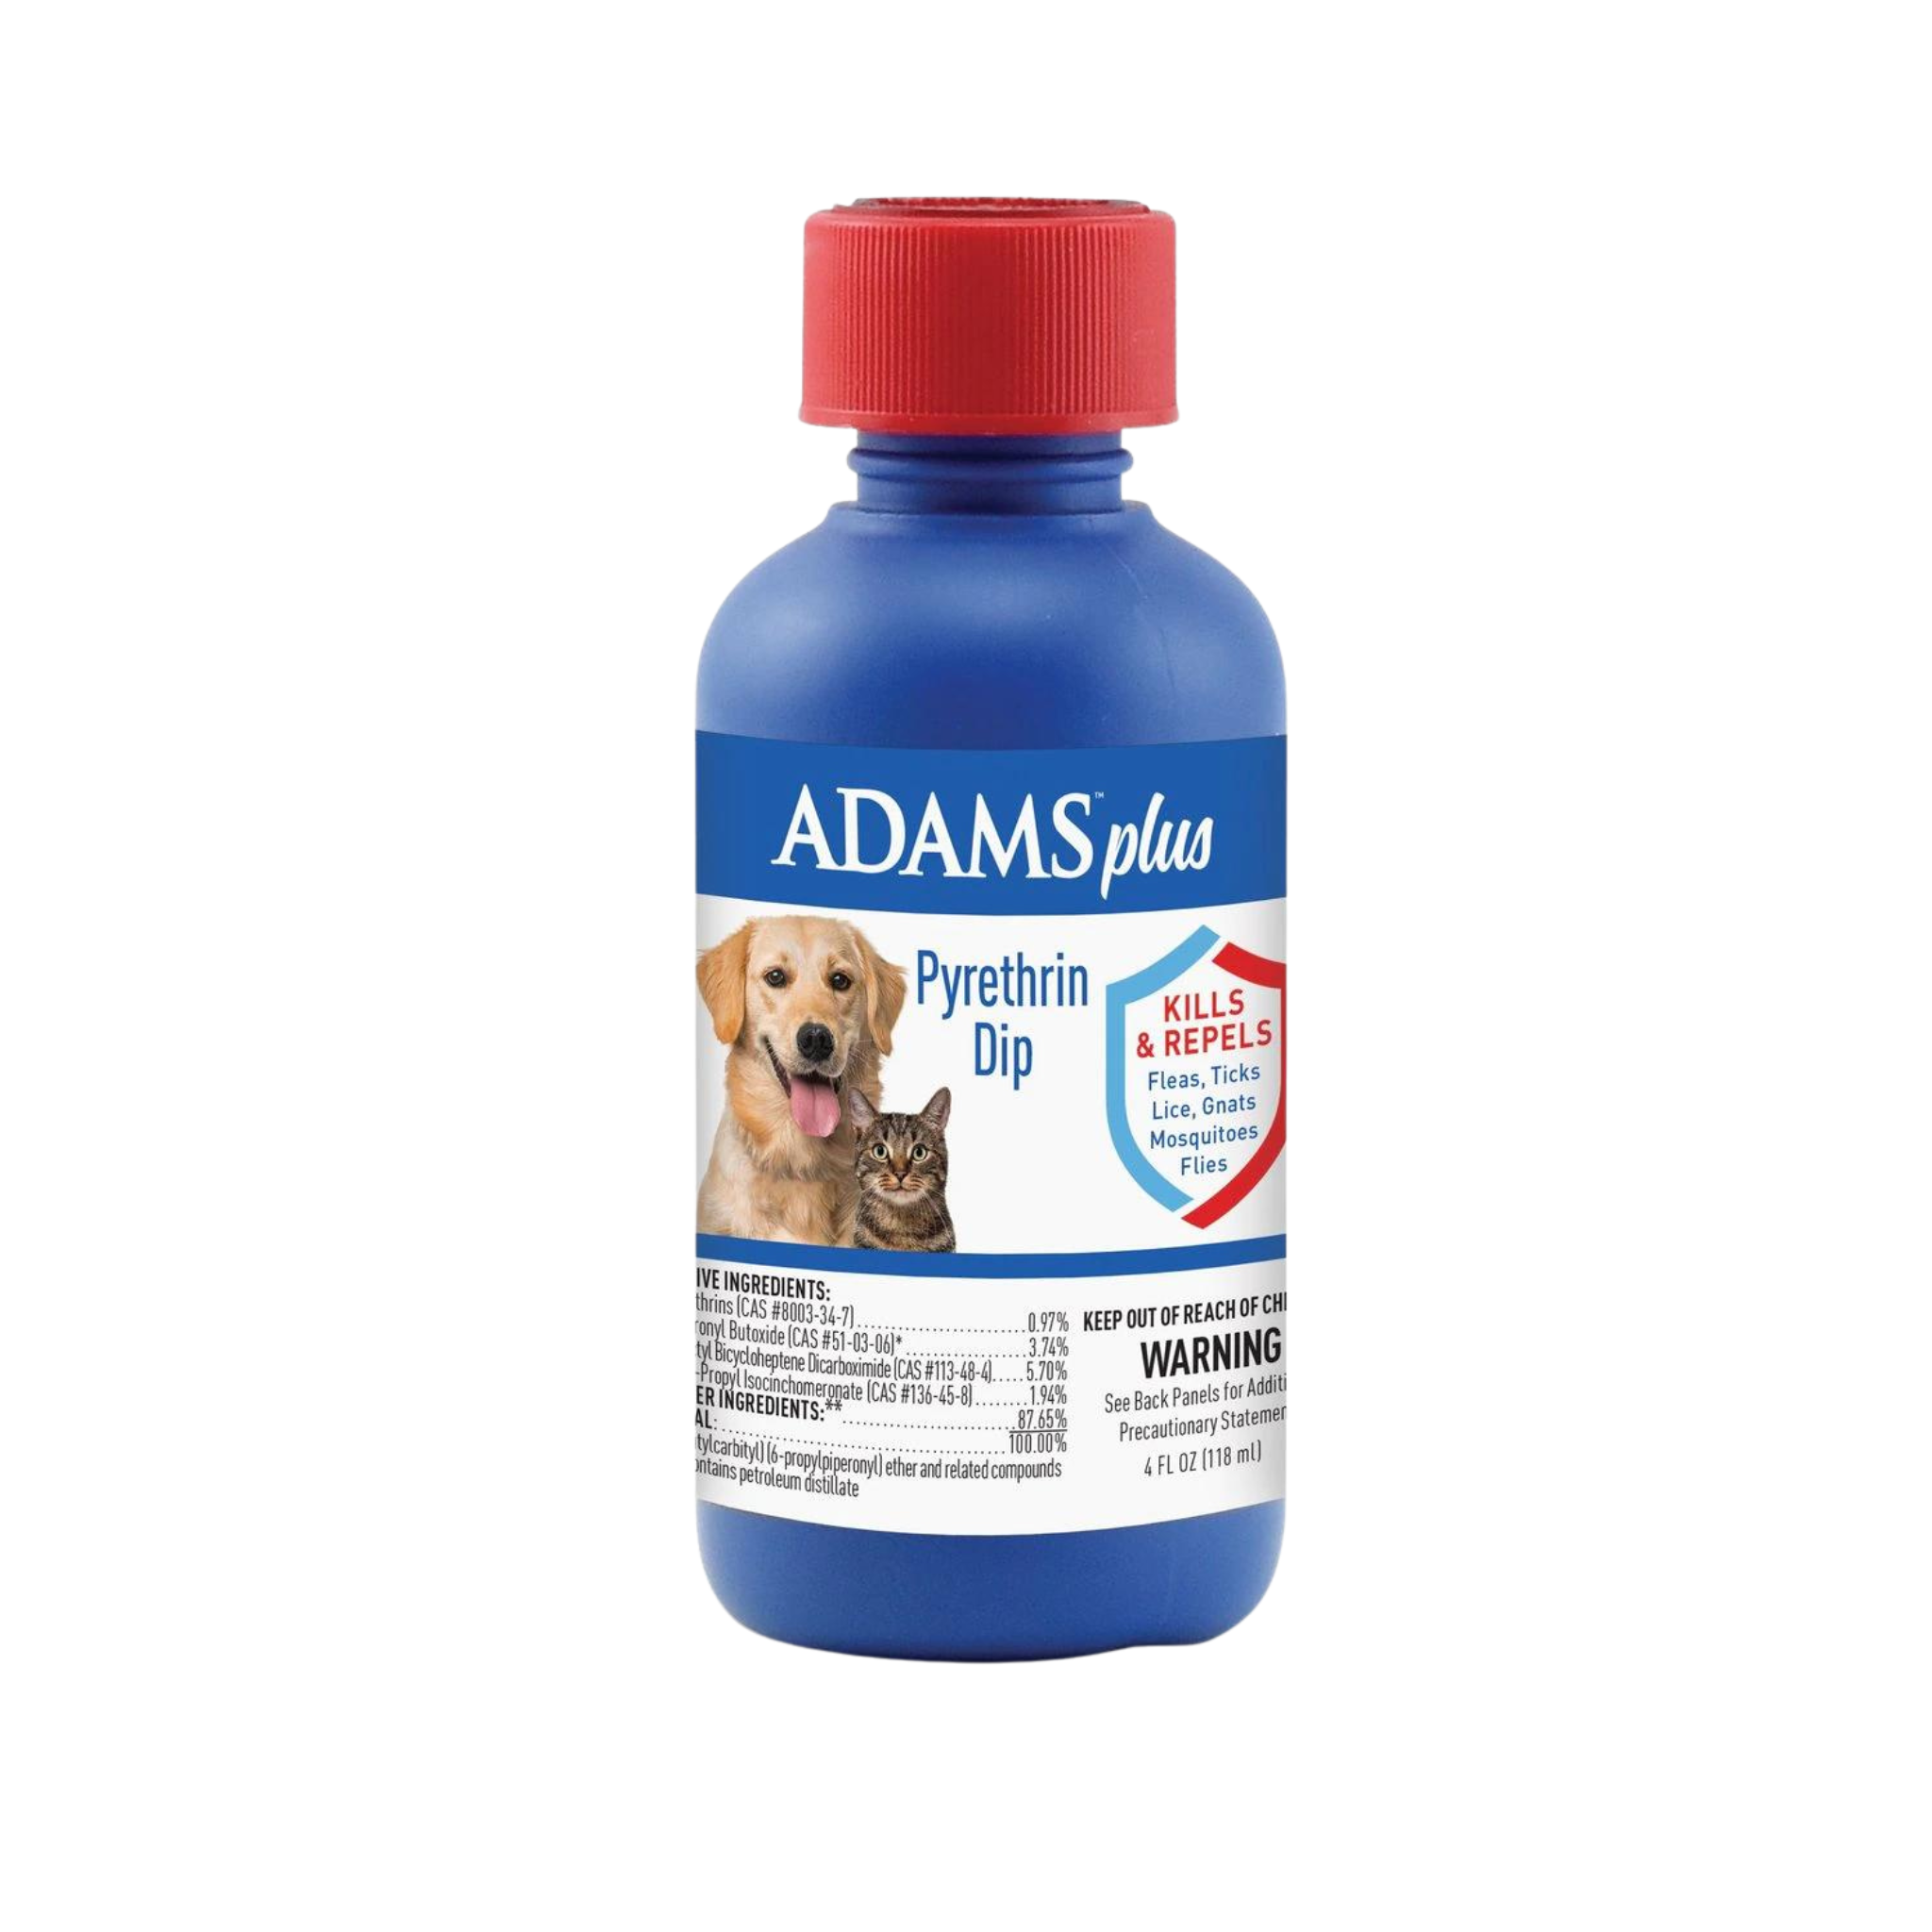 Adam's Plus Pyrethrin Dip For Dogs & Cats